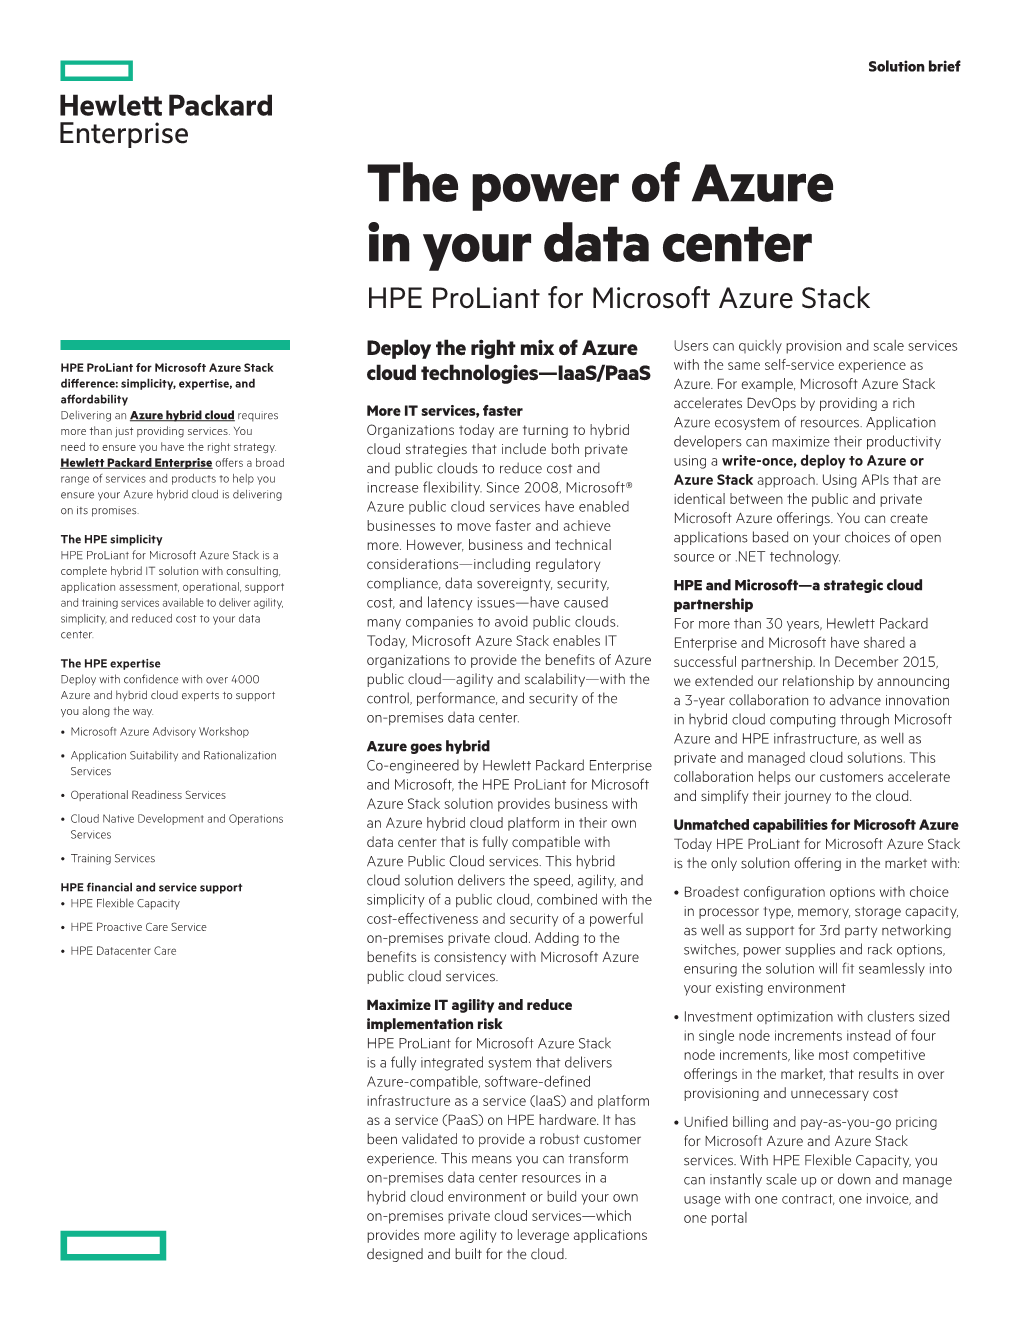 The Power of Azure in Your Data Center: HPE Proliant for Microsoft